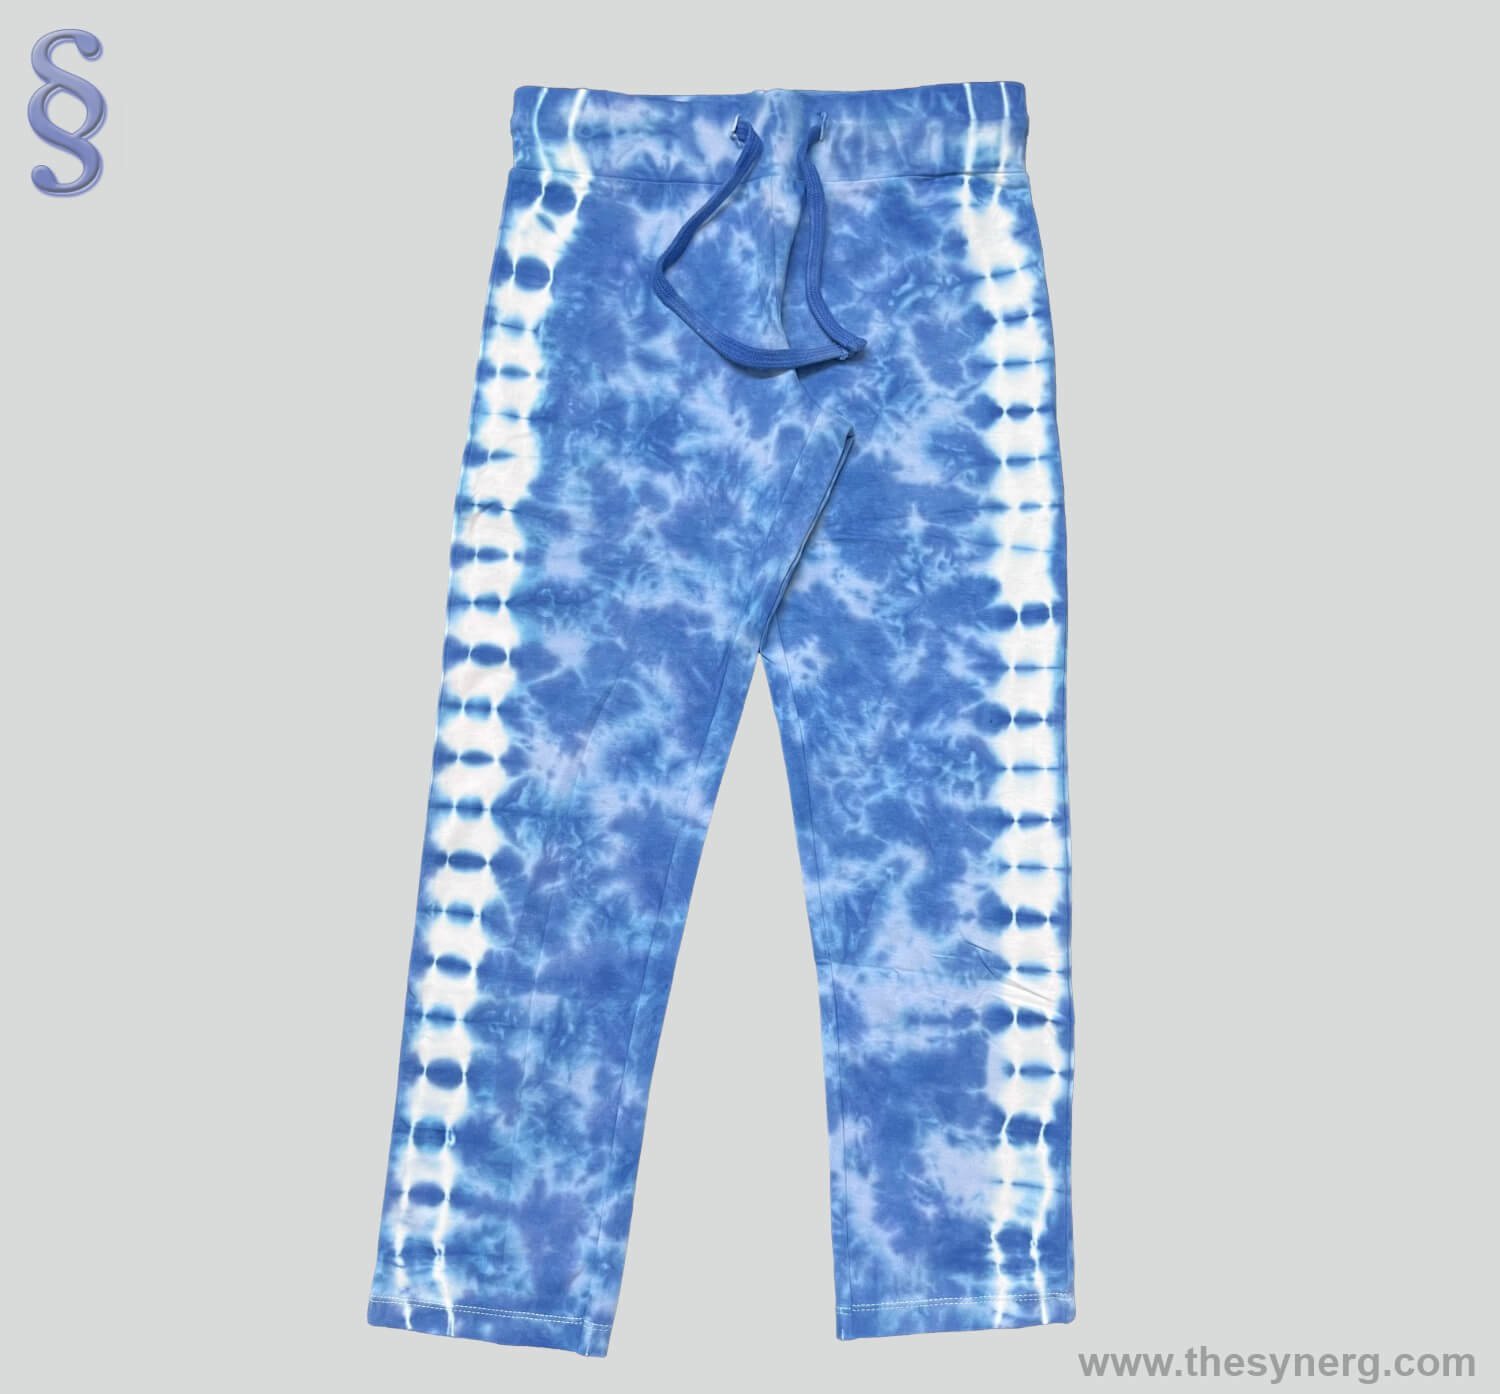 Personalized Wholesale 2 Piece Activewear Set Manufacturers In USA, AUS, CA  And UAE